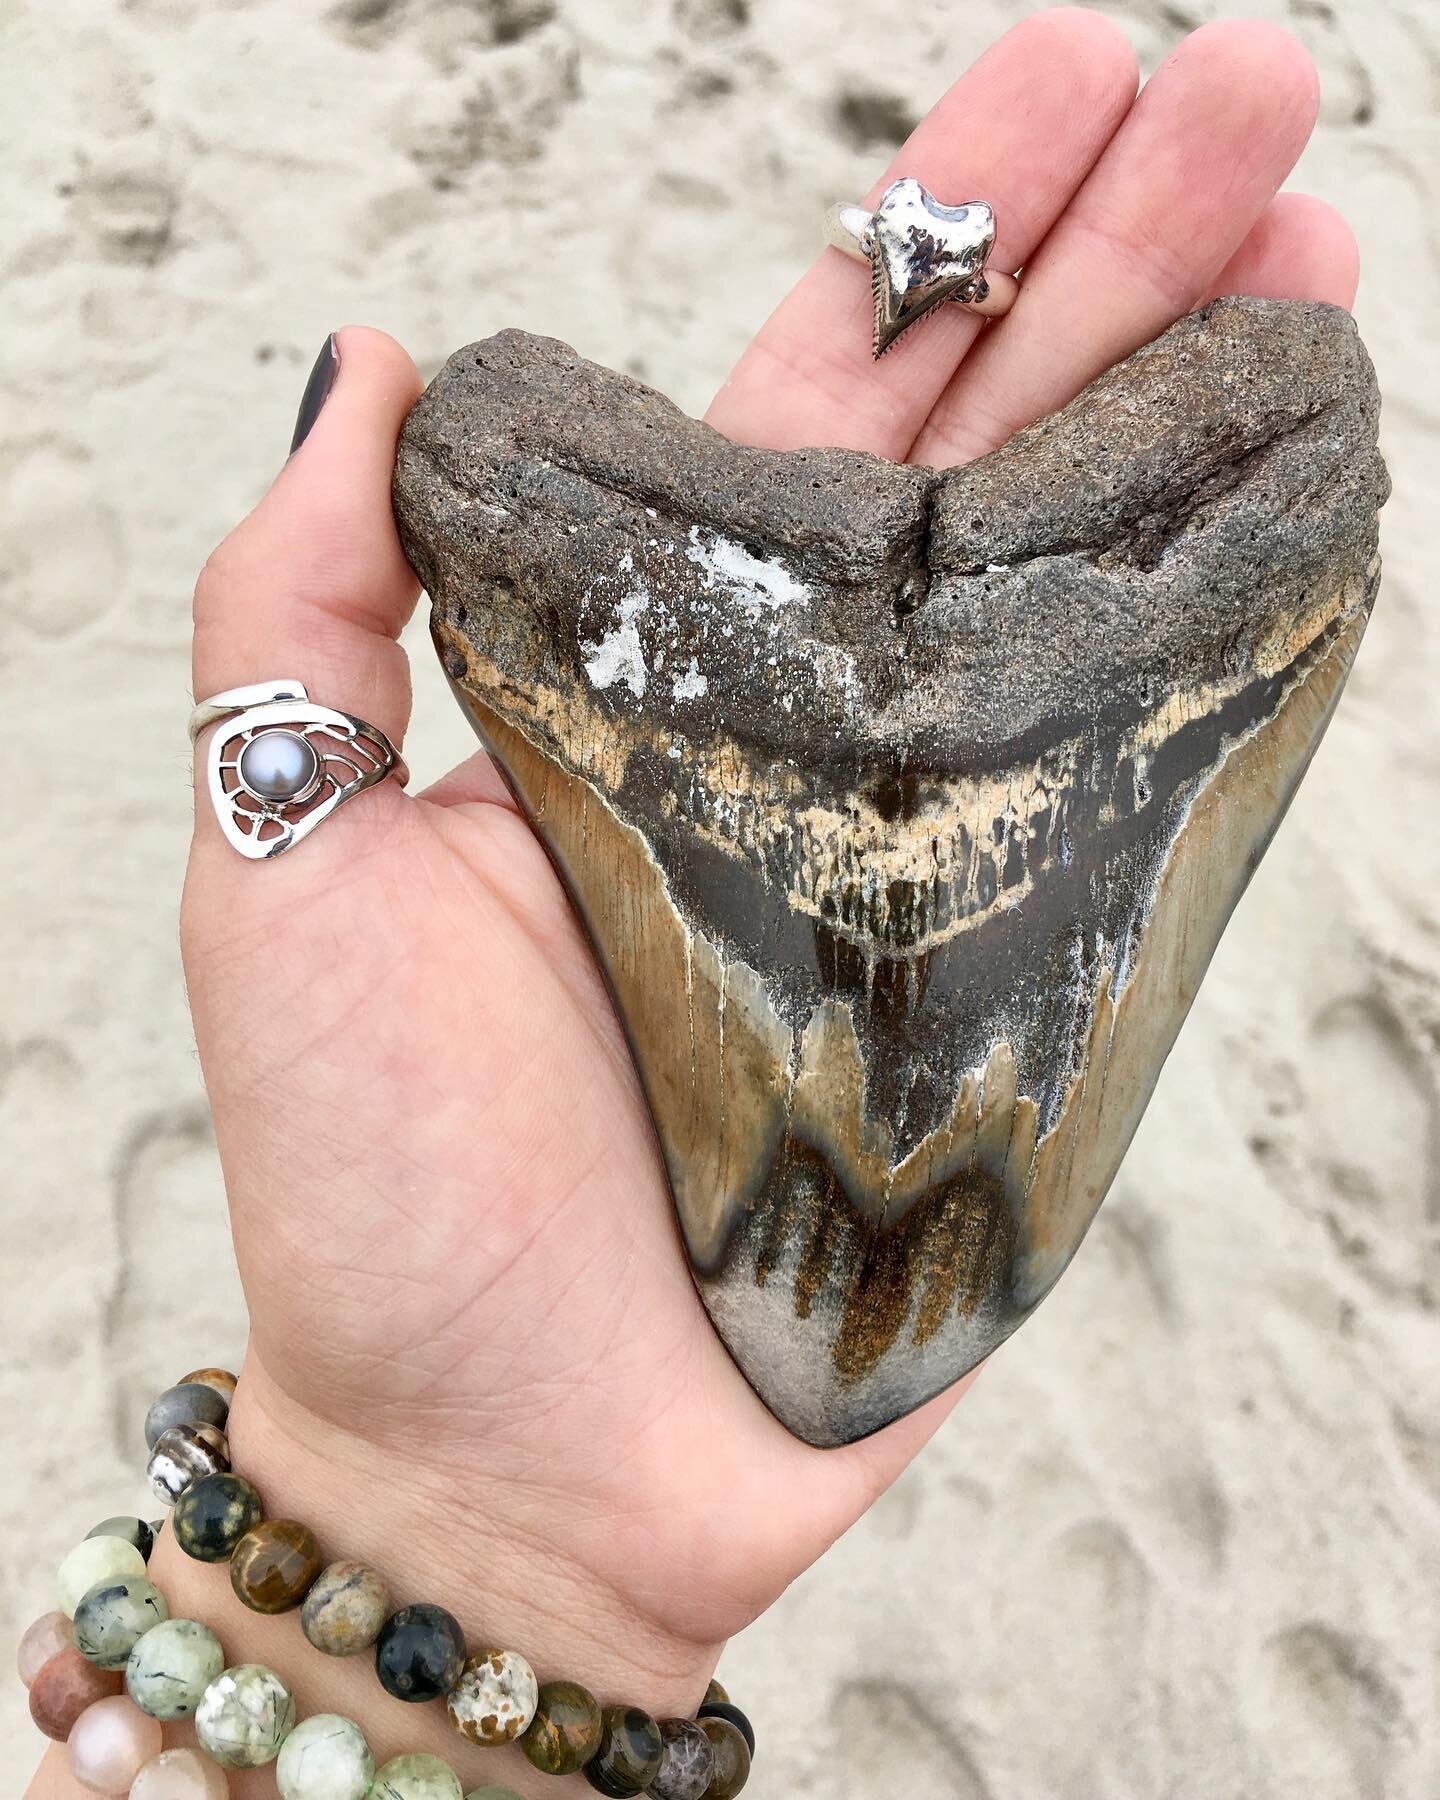 Shark bait! Hoo ha ha!🦈

Kicking off our Hampton store takeover with this MASSIVE Megalodon tooth for shark week! 🌊

Comment some items you&rsquo;d like to see us feature or to claim any piece in this pic 🐚

Megalodon Tooth - $300
Shark Tooth Ring